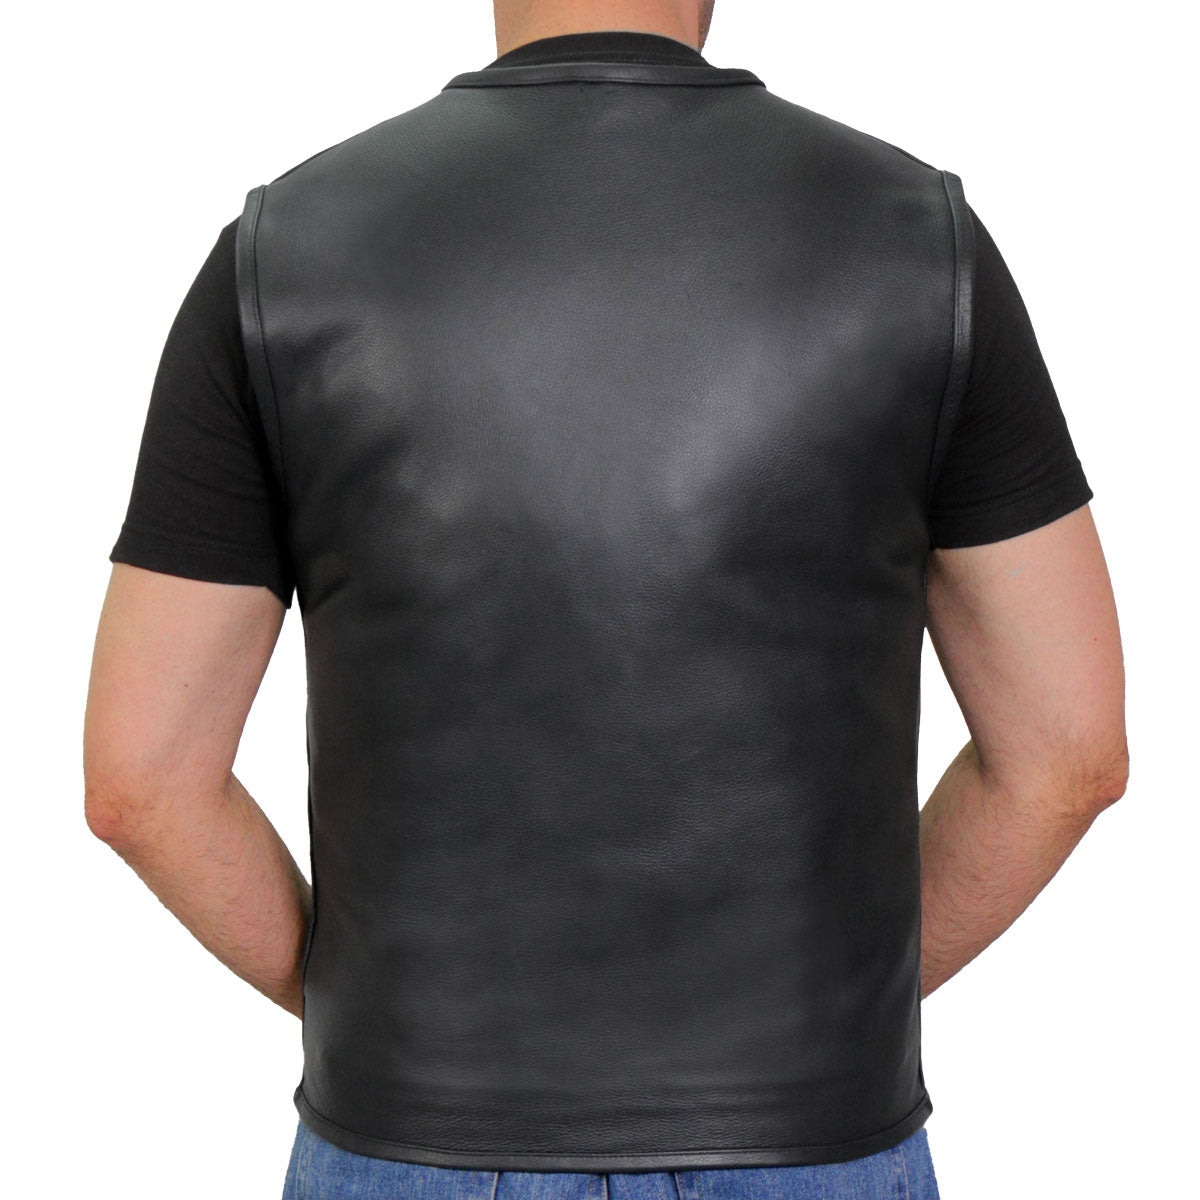 Hot Leathers VSM1036 Men's Black 'Conceal and Carry' Motorcycle Club Style Leather Zip Vest